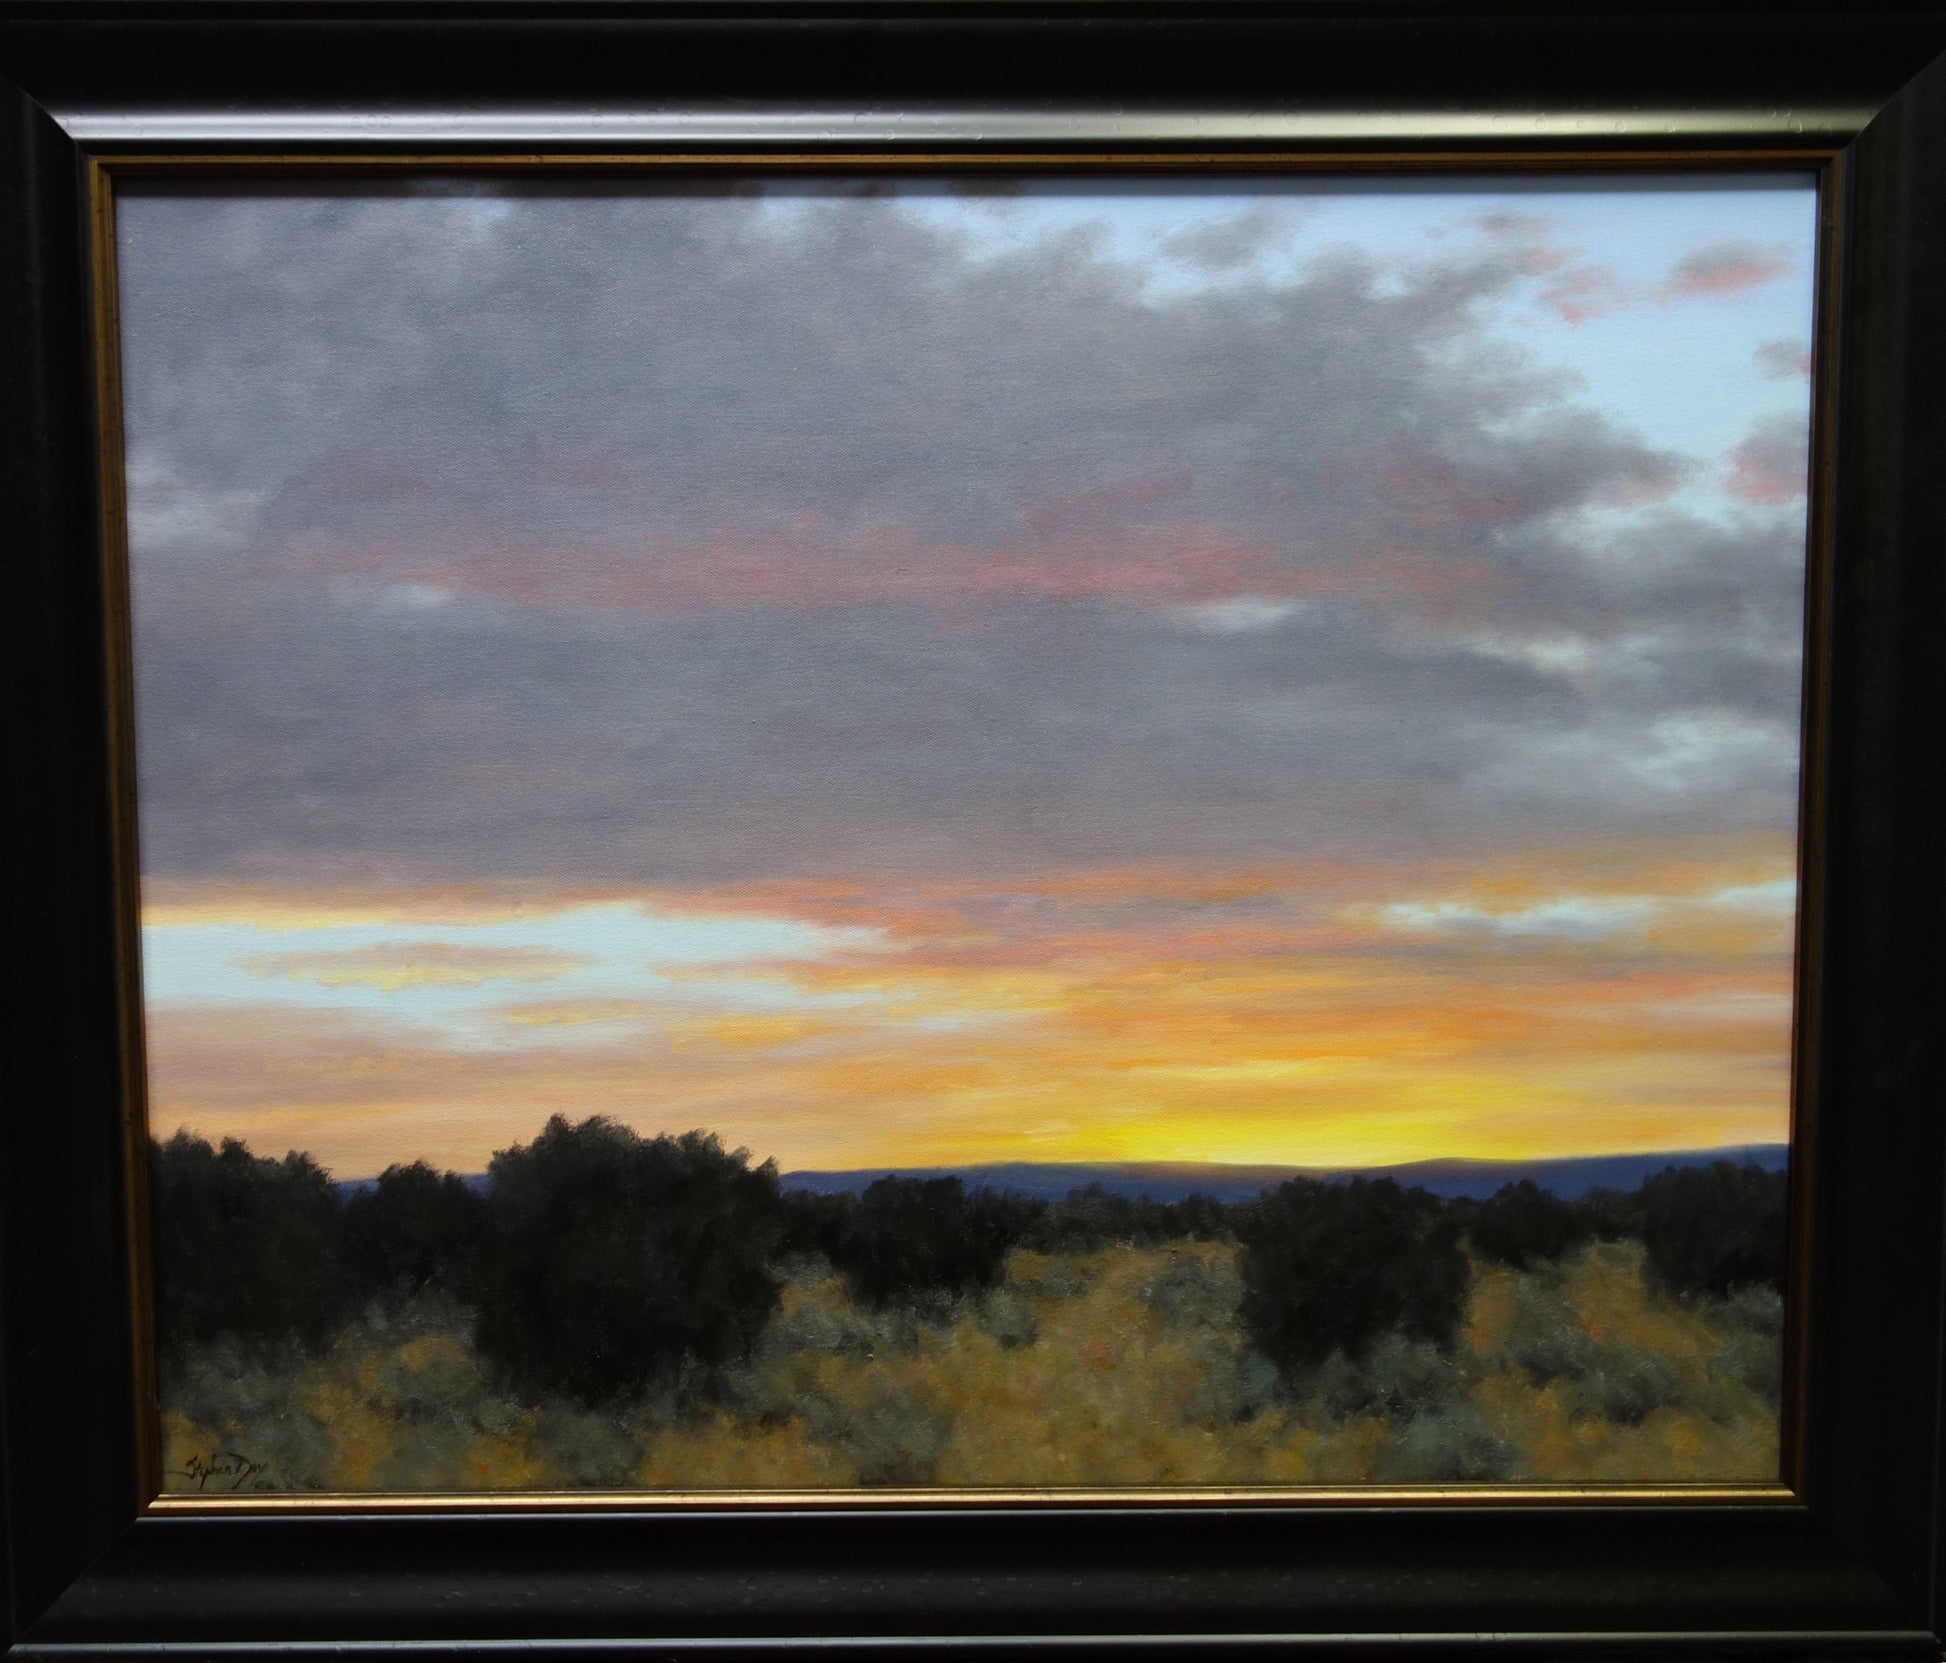 In the Silence of Evening-Painting-Stephen Day-Sorrel Sky Gallery